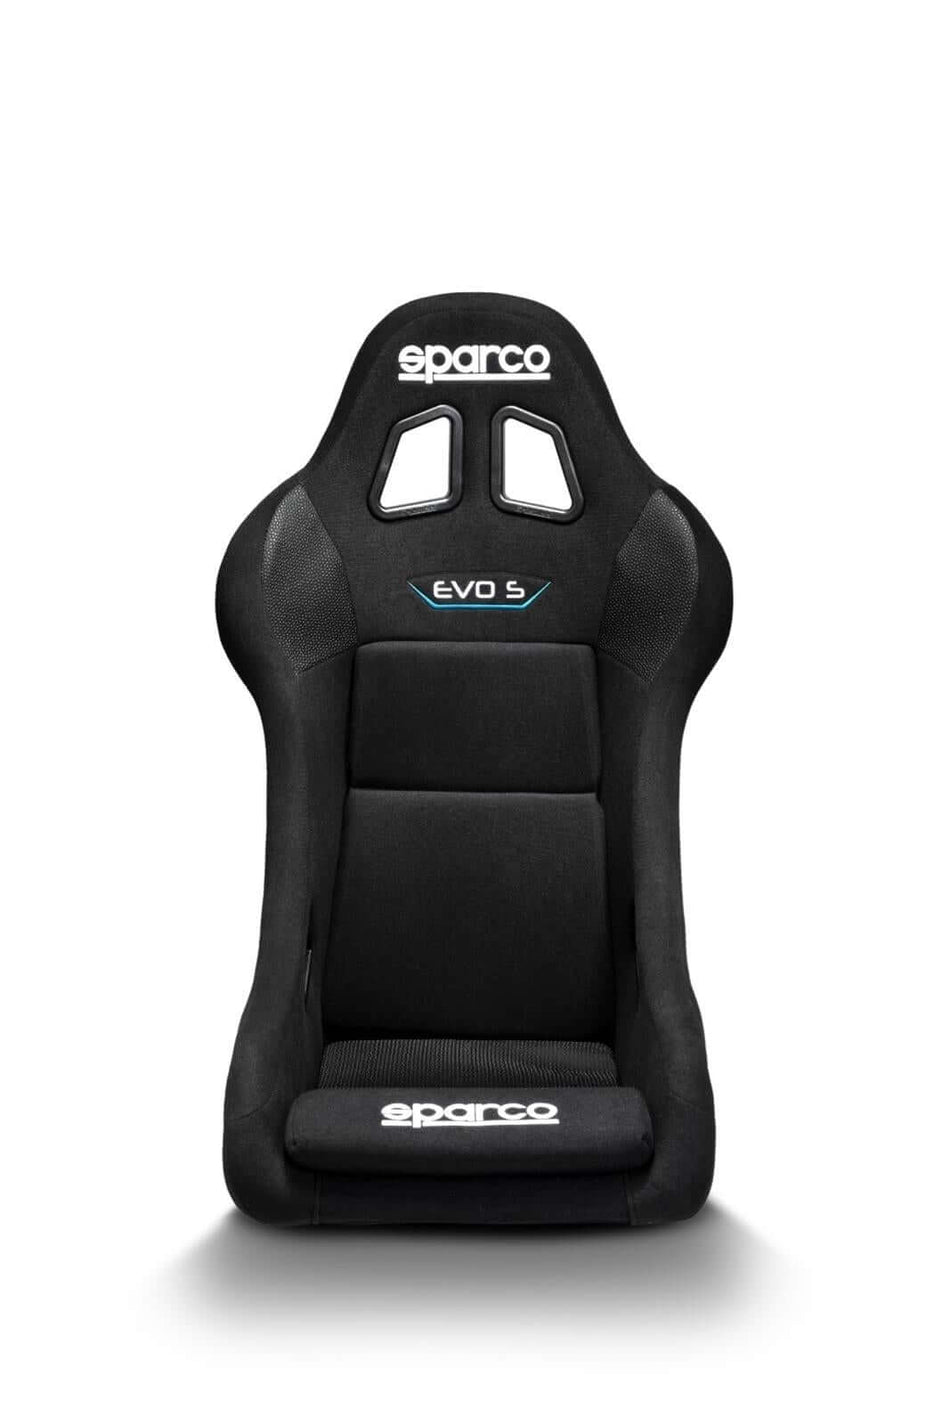 Sparco Evo S QRT Competition Seat